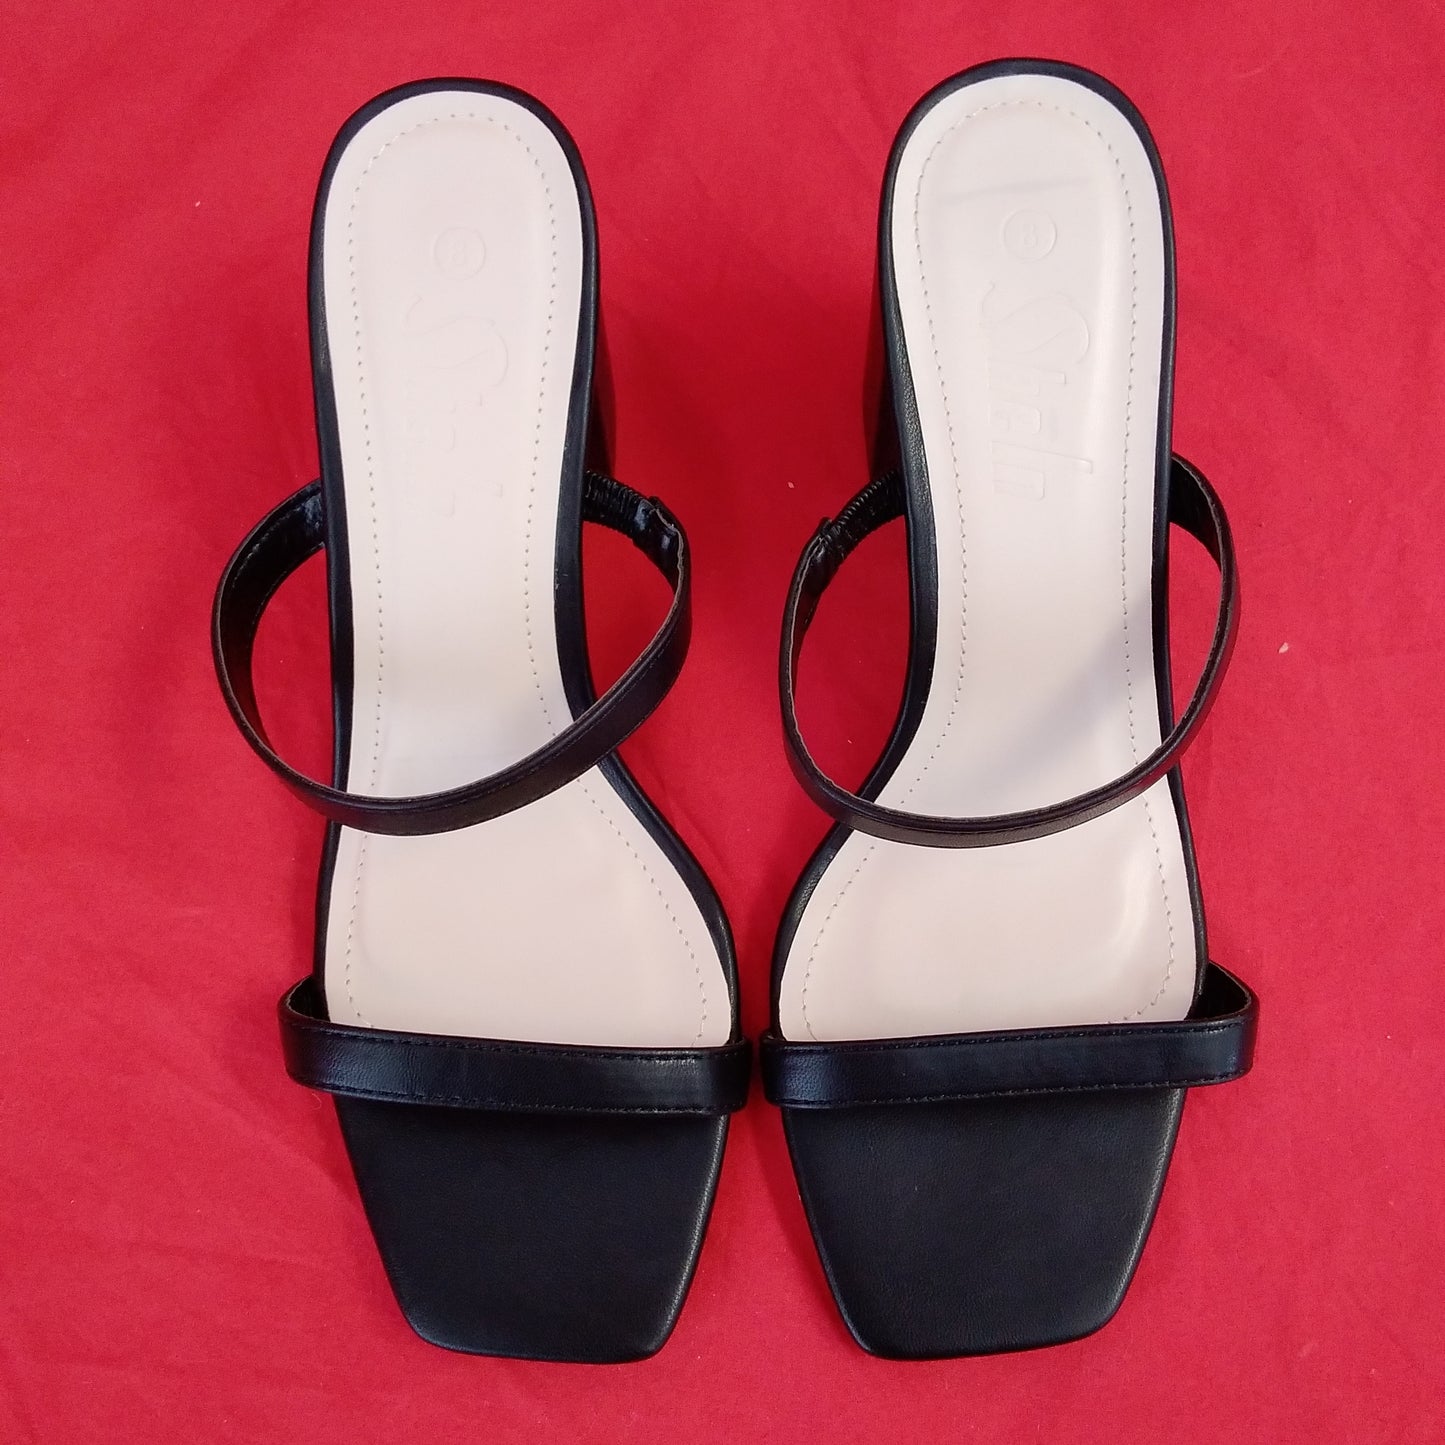 NIB - Shein Black Square Sole Double Strap Chunky Heel Sandals - Size: 8